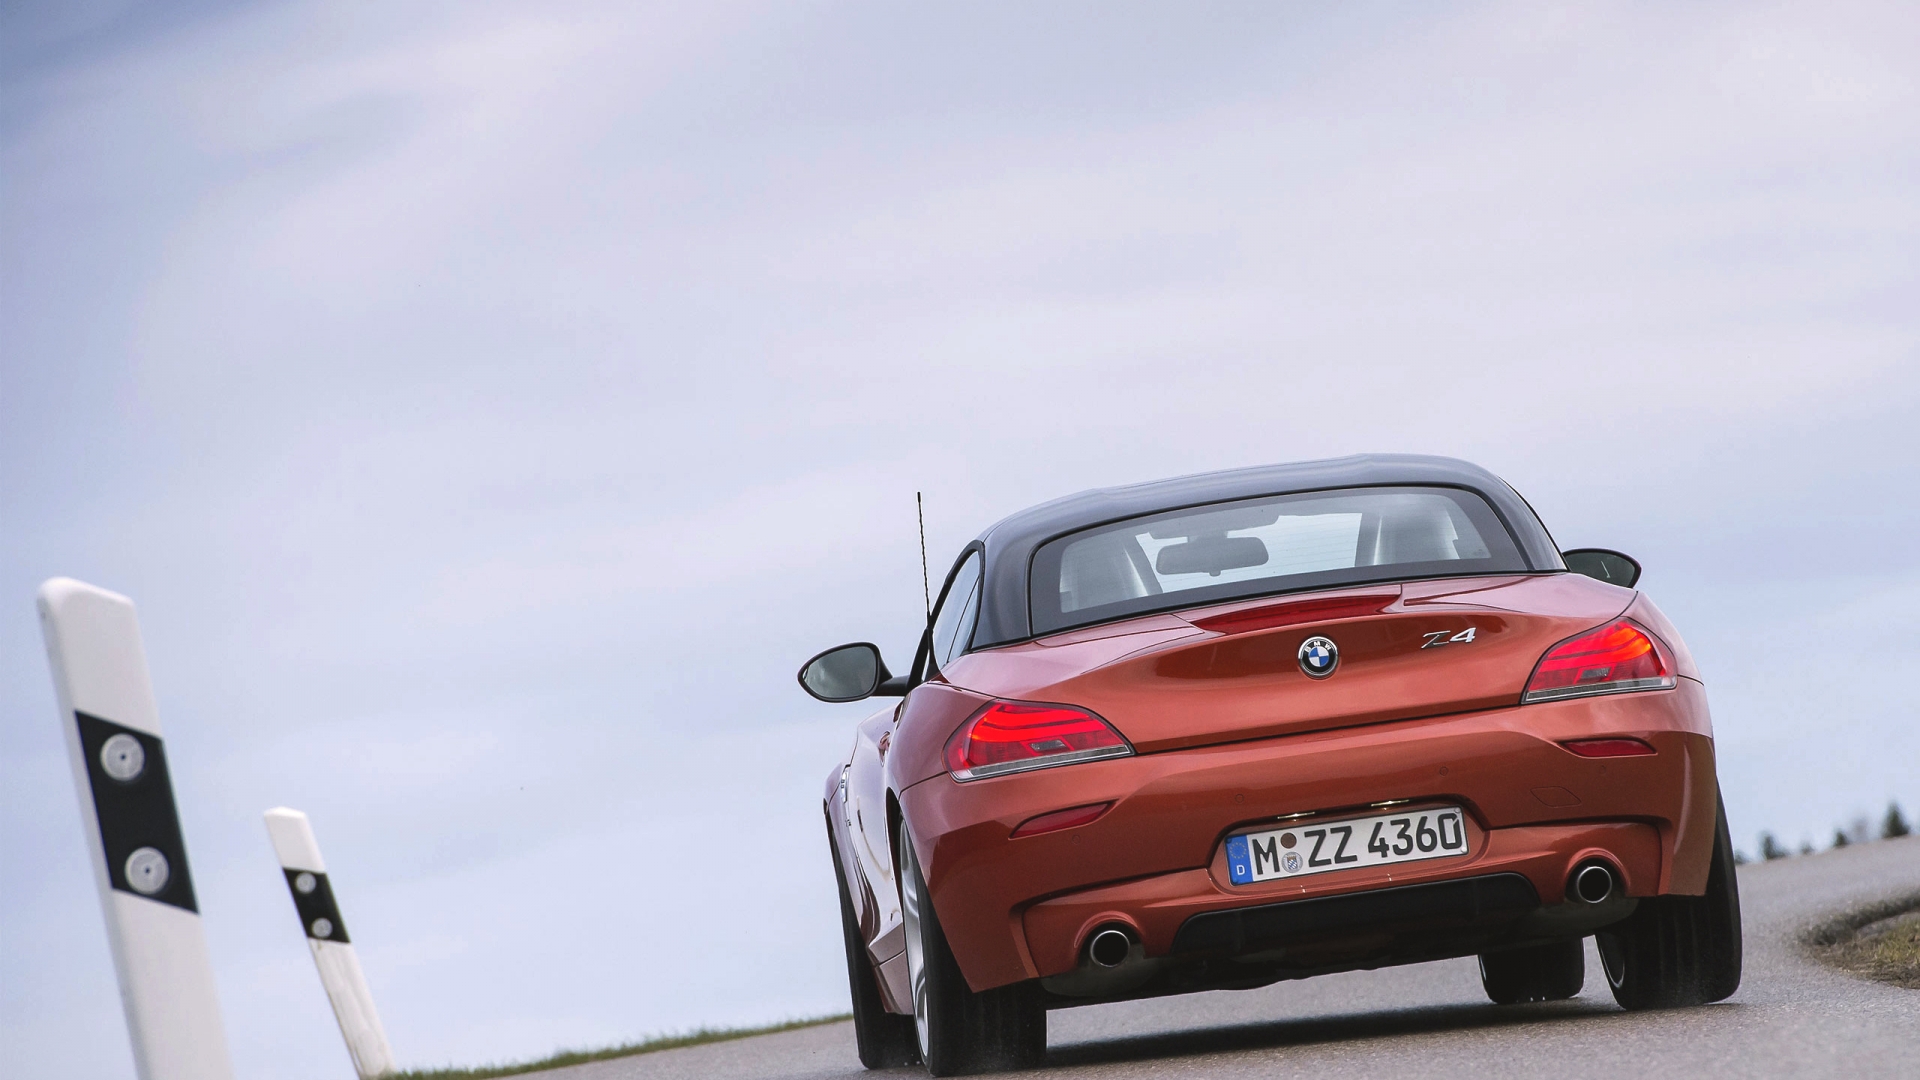 BMW Z4 Roadster Back View for 1920 x 1080 HDTV 1080p resolution